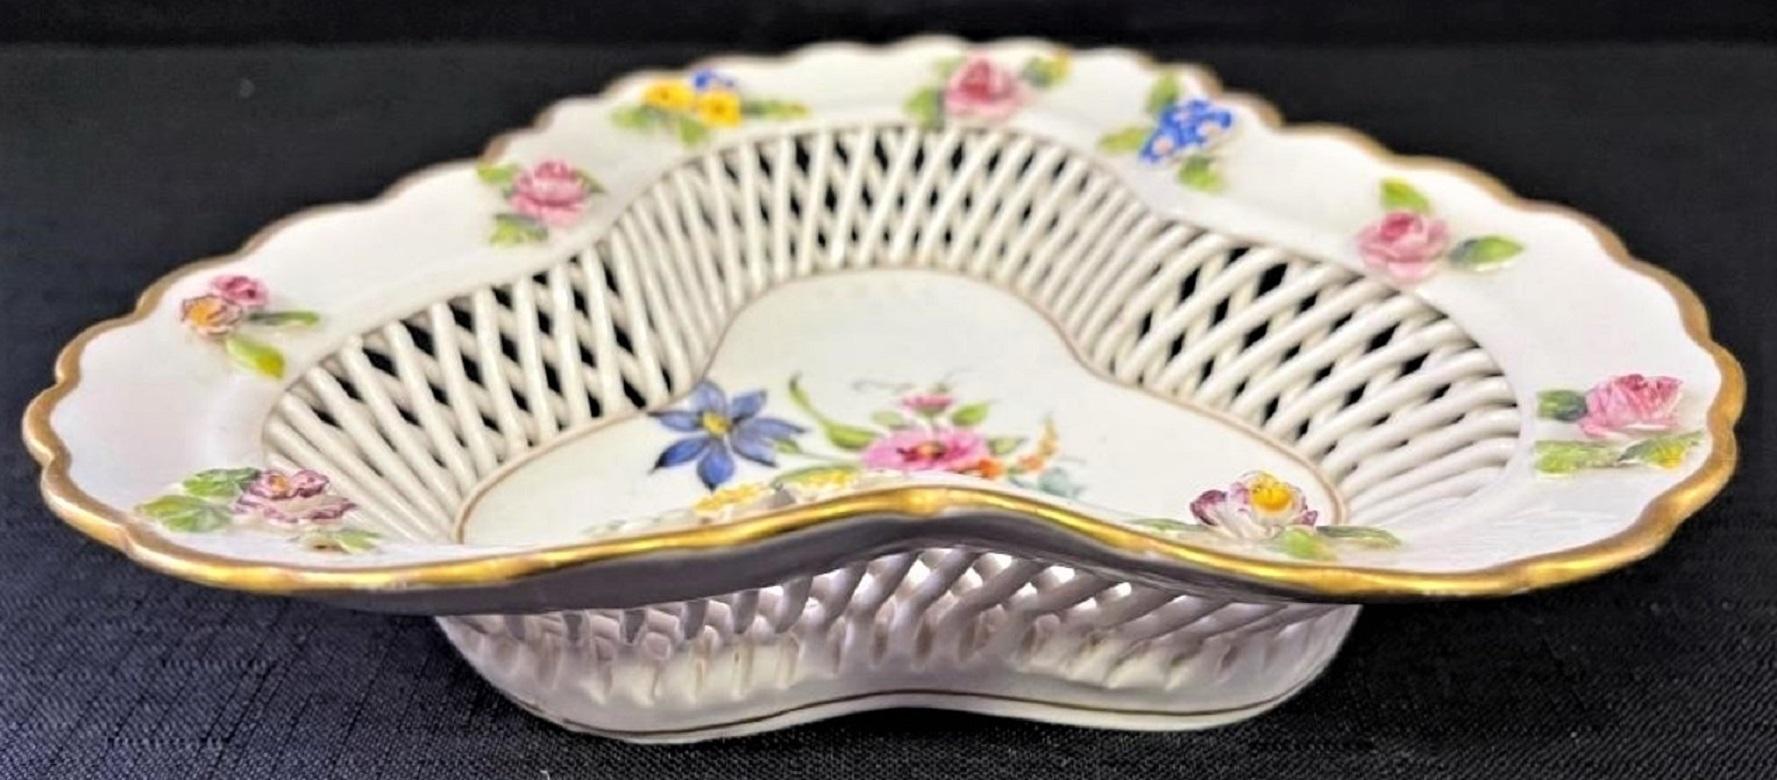 A memorable Valentine's Day gift for someone special.

This rare antique Von Schierholz Rococo Meissen-style floral encrusted porcelain basket with Schierholz Plaue mark indicates a manufacture date of between 1907 – 1927. Established in 1817 in